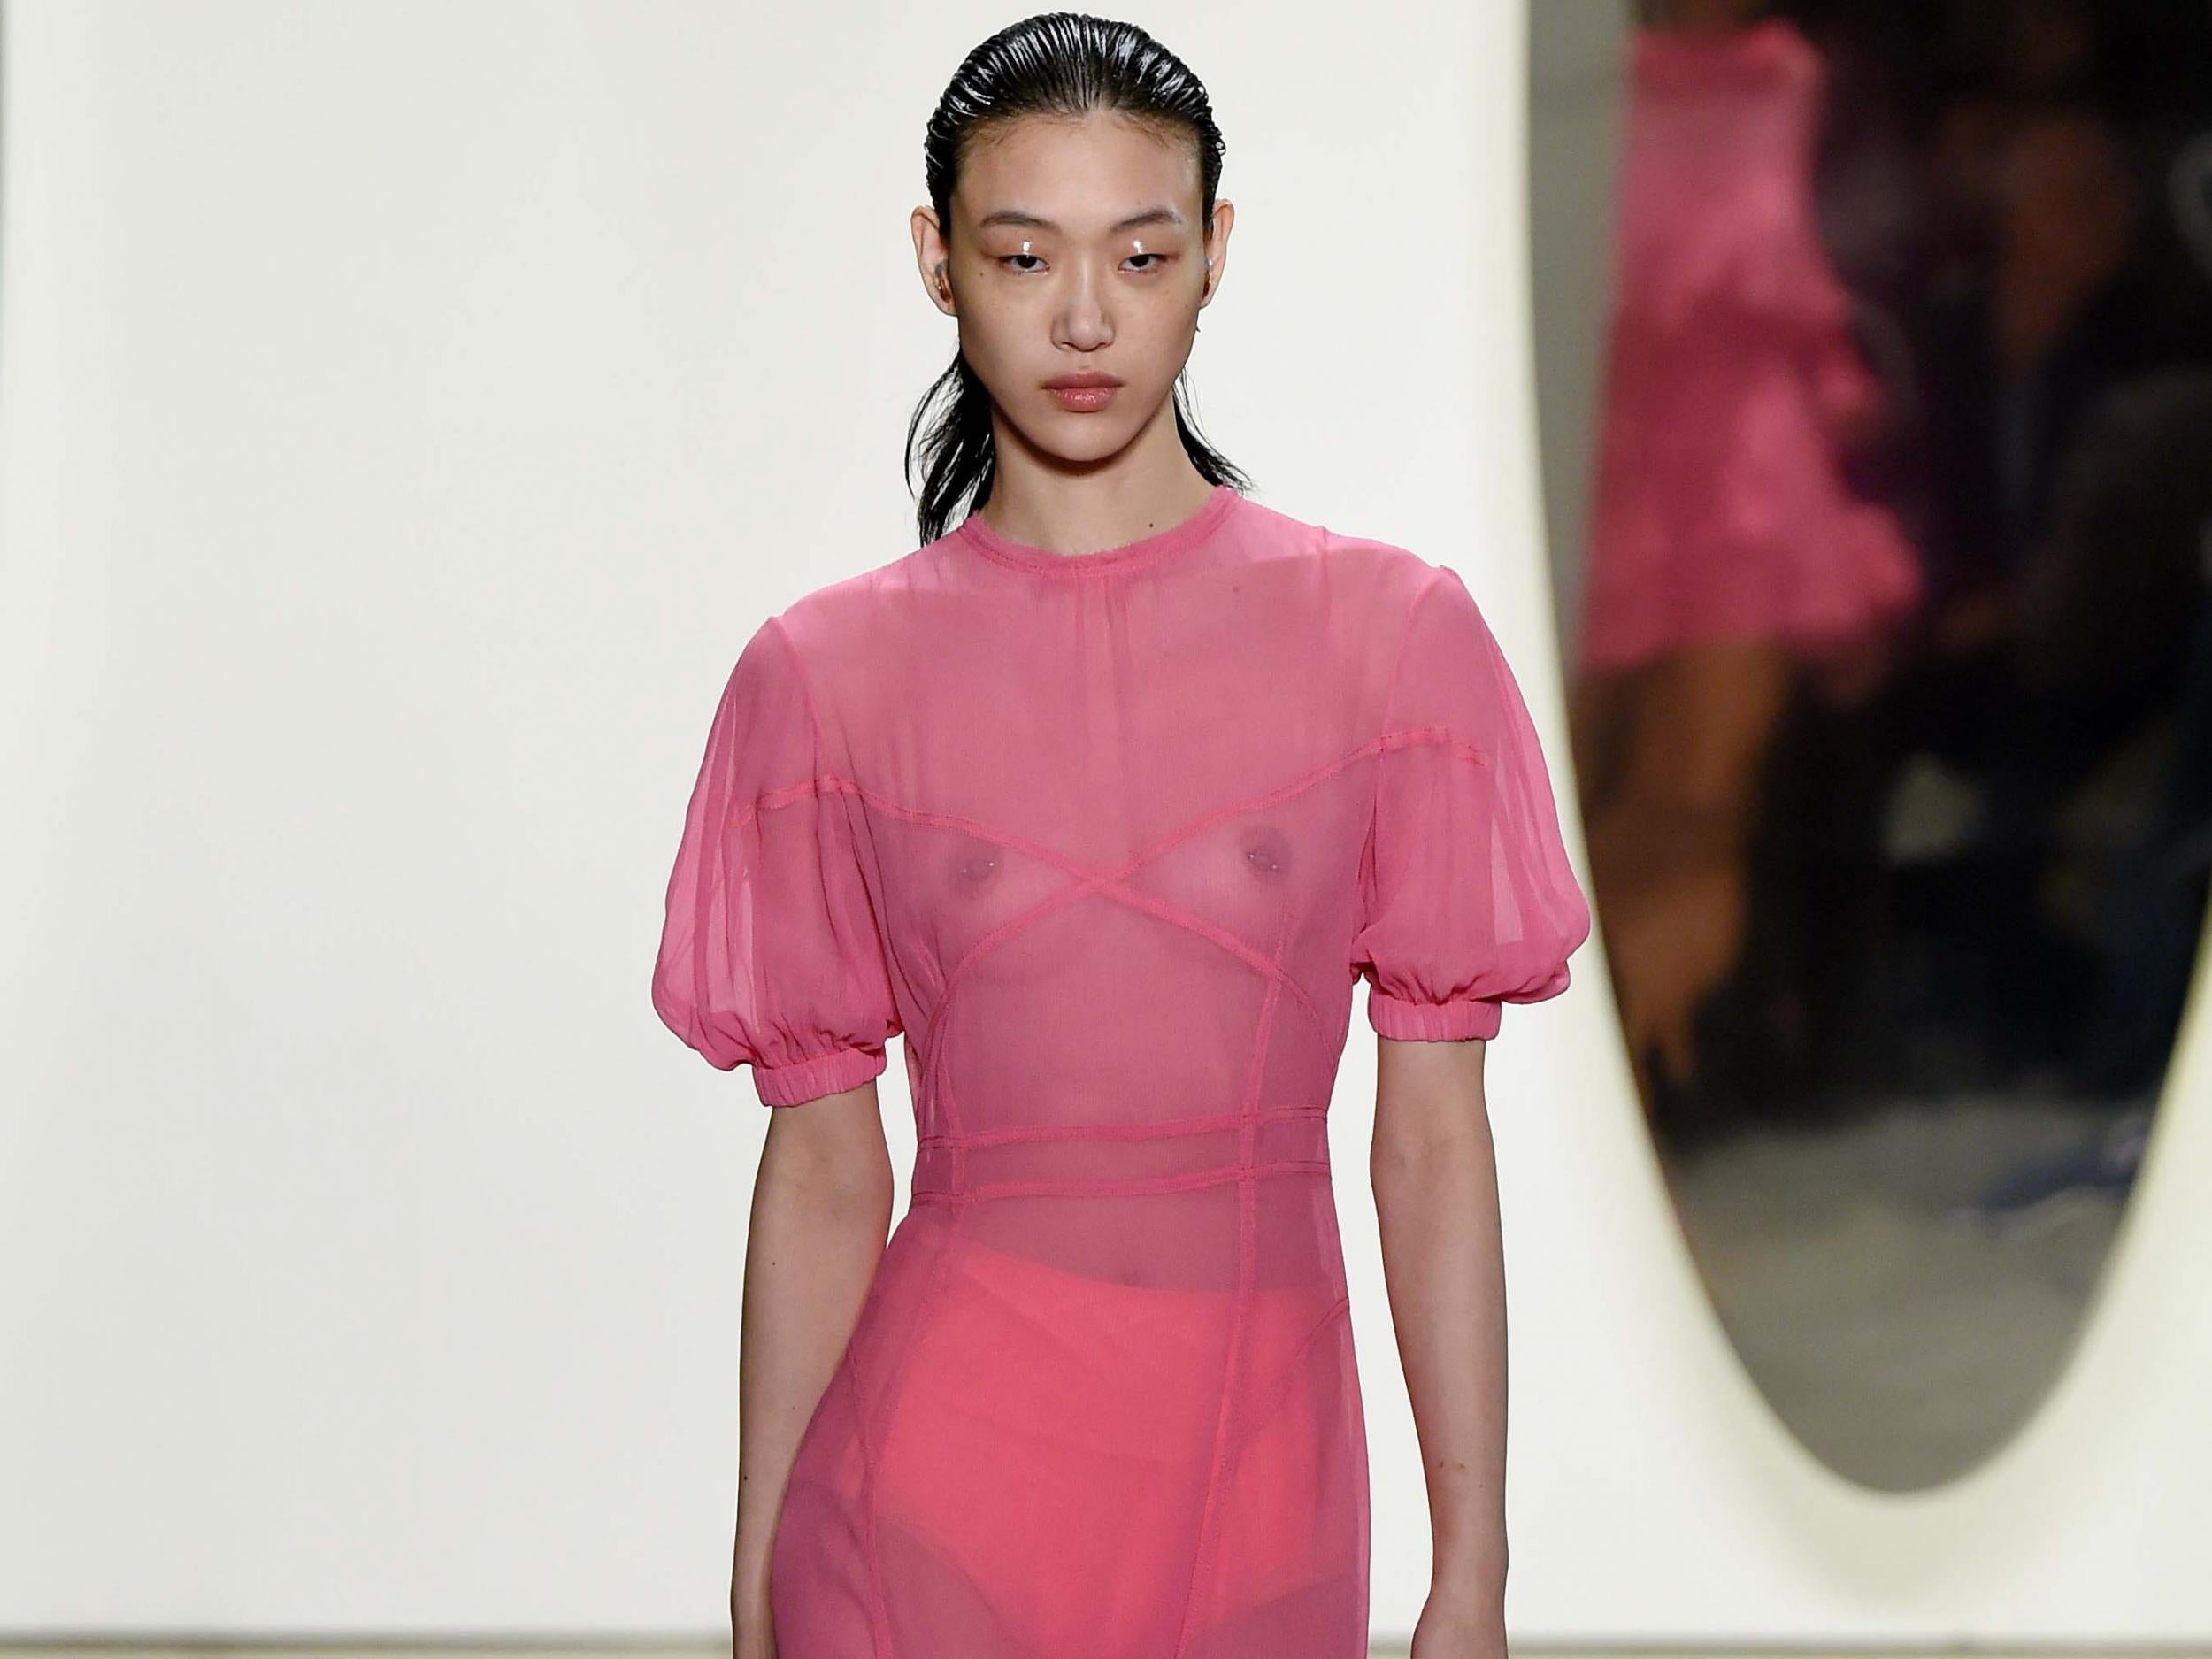 Prabal Gurung’s models wore seethrough dresses and sweaters with statement briefs